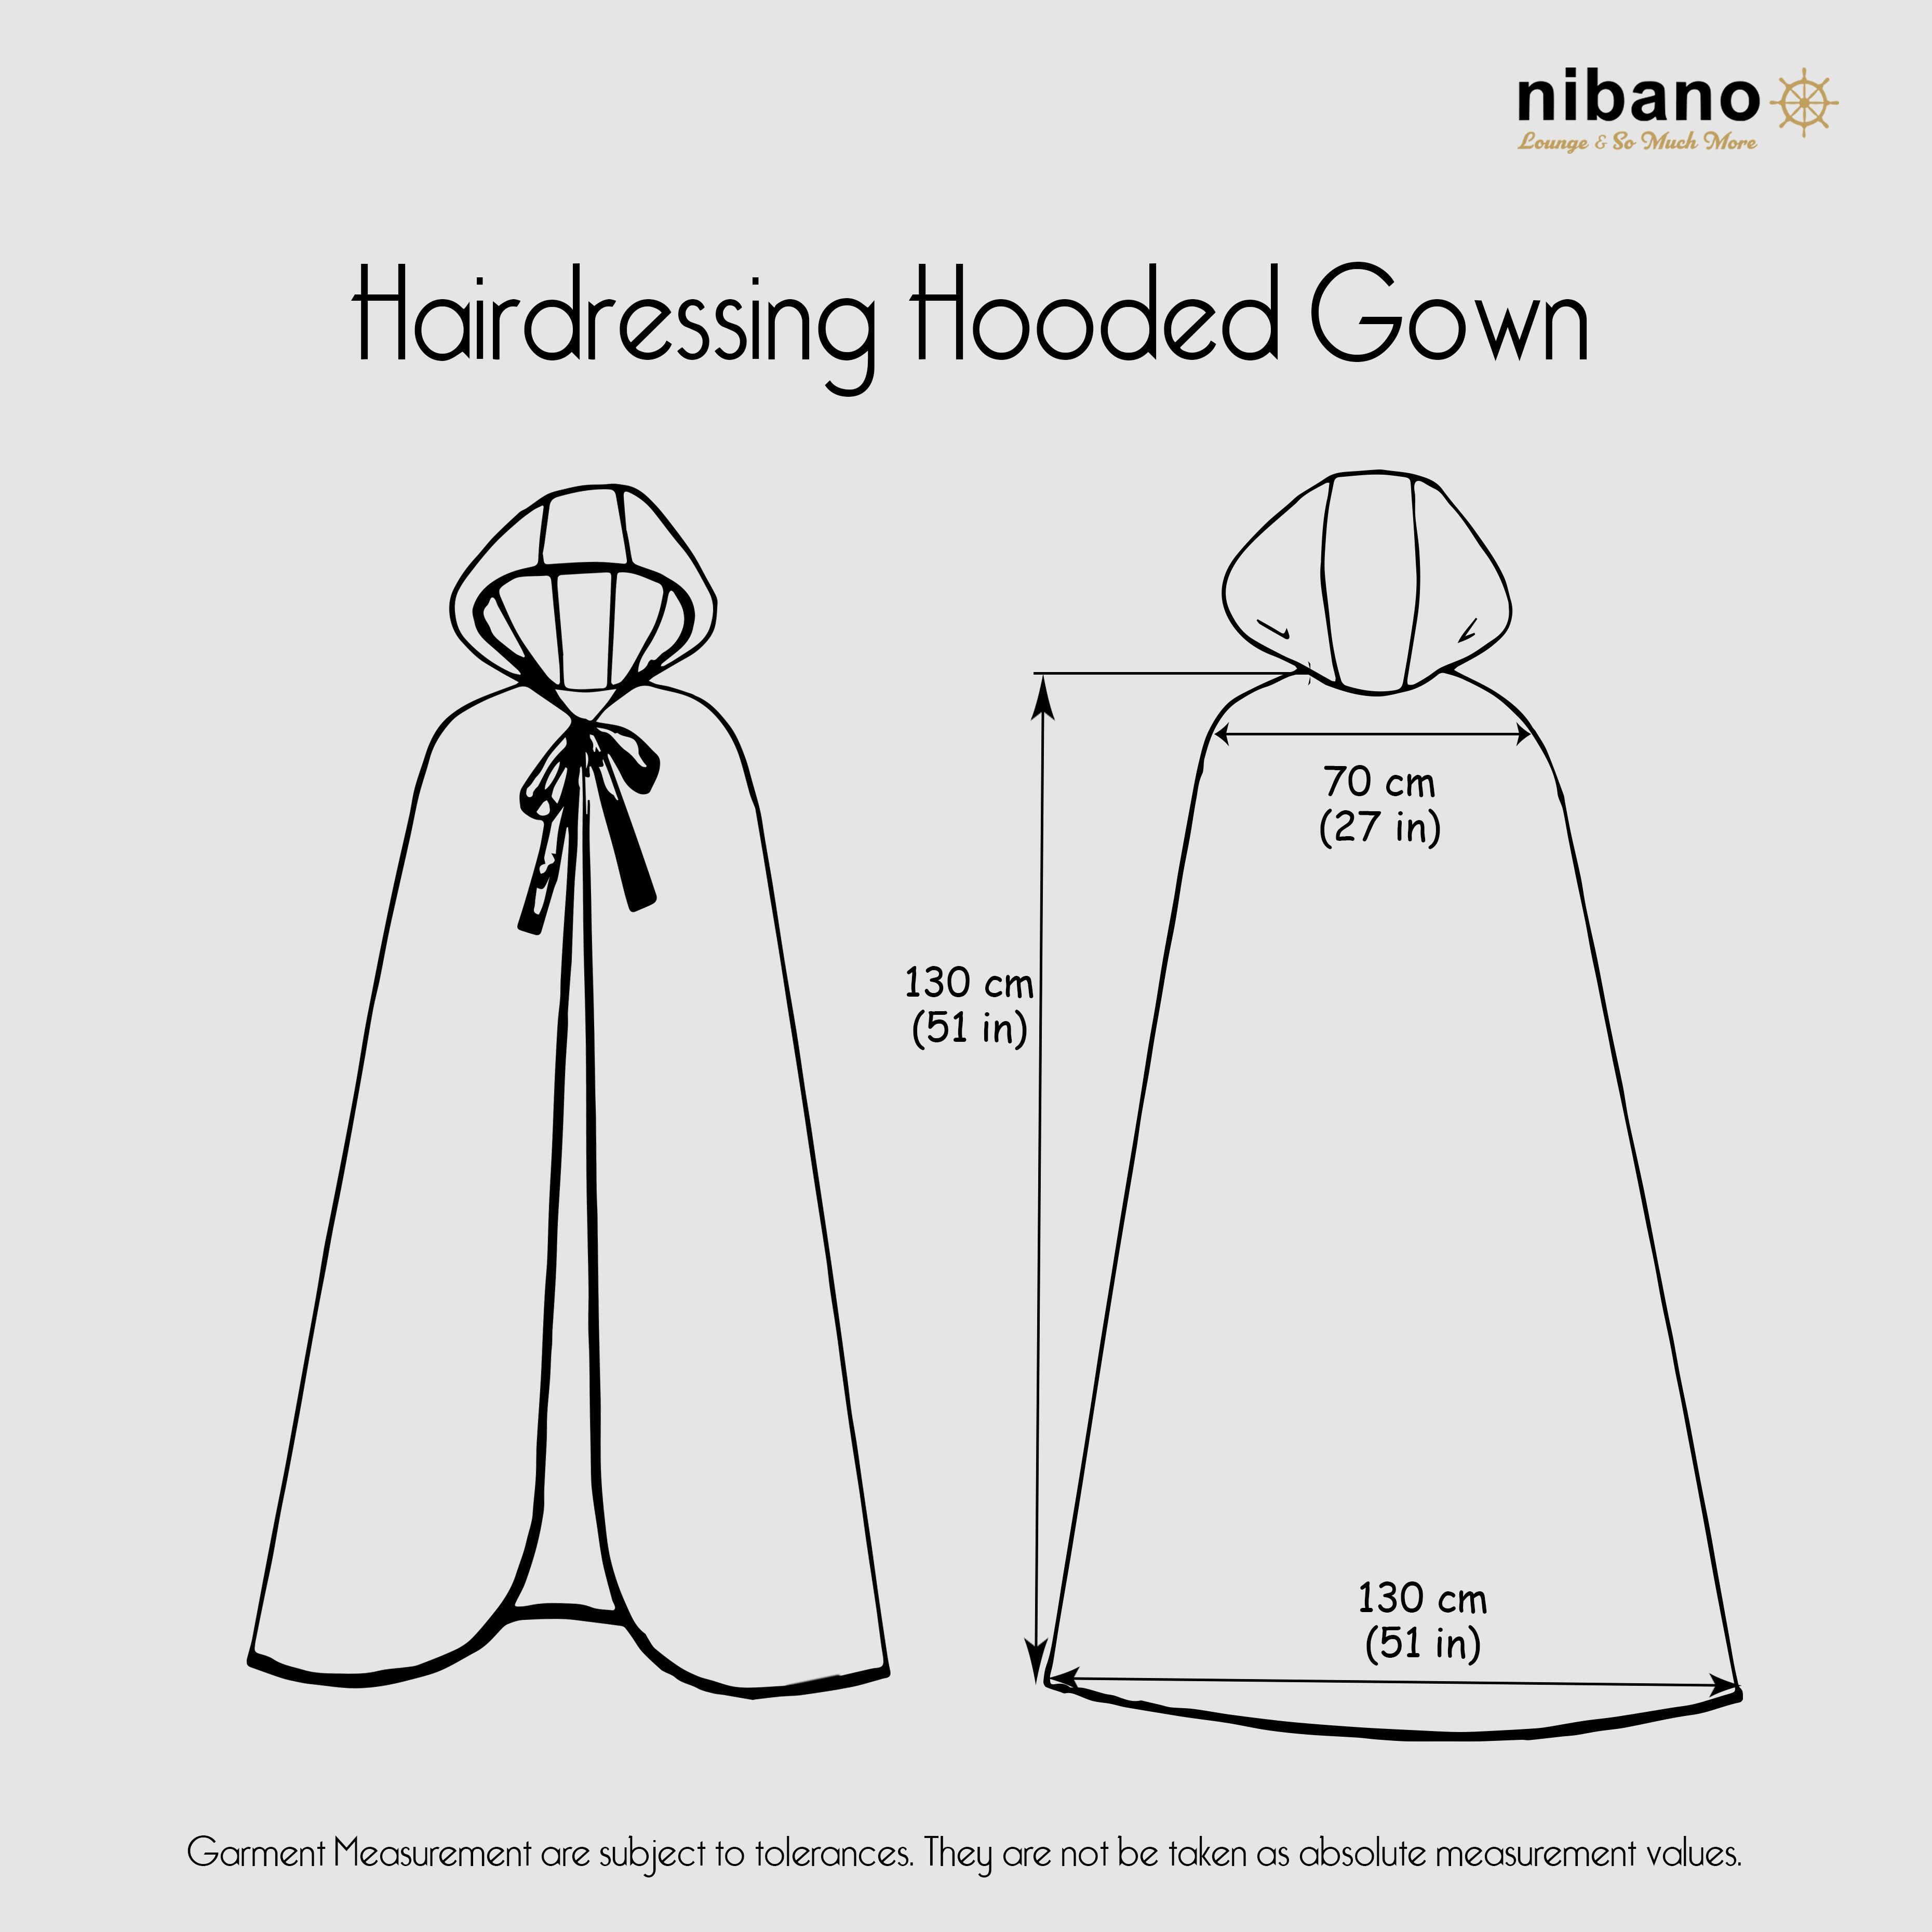 Nibano Hooded Hairdressing Show Gown white size chart